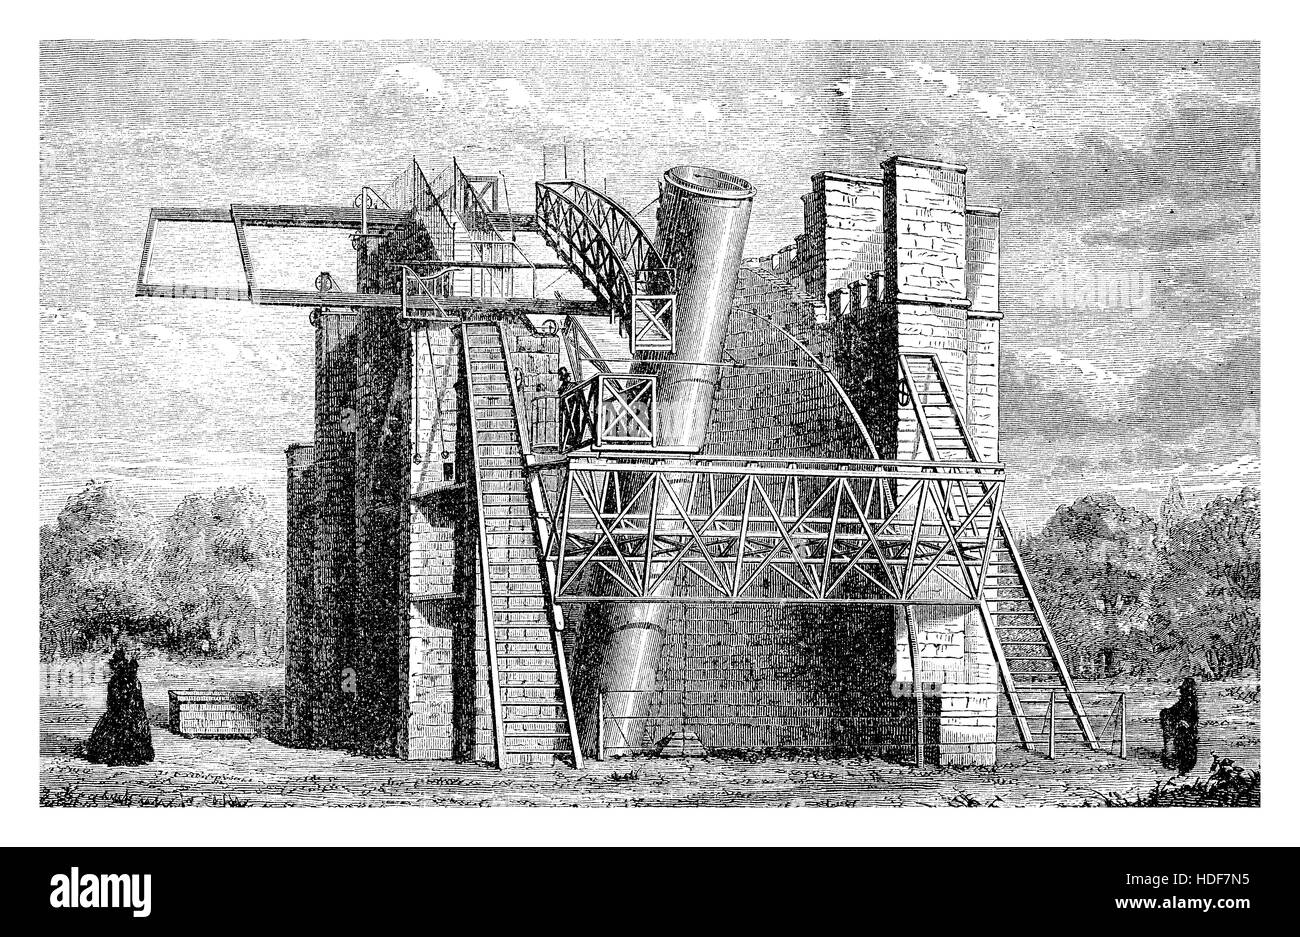 Monster telescope called the Leviathan of Parsonstown built in 1845 by Irish William Parsons, earl of Rosse, the world largest telescope of that time weighting 4 tons. Stock Photo